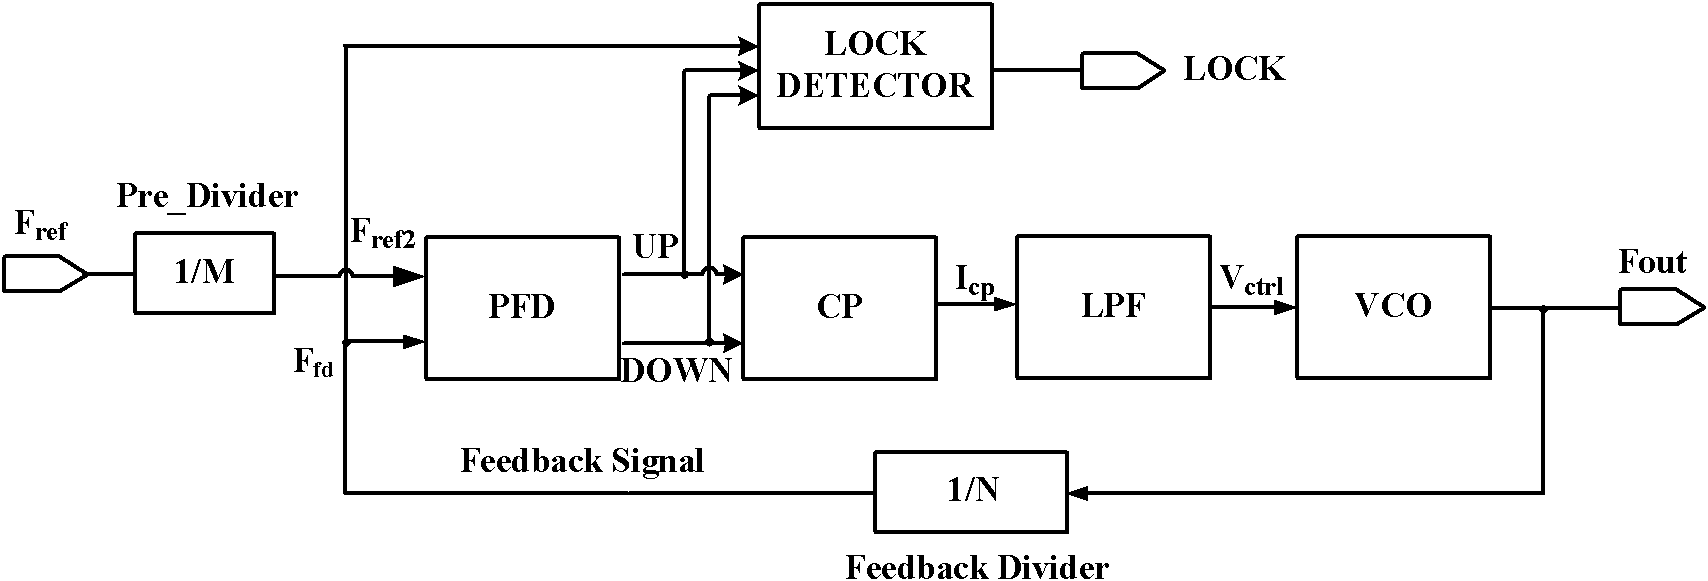 Locked detection circuit applied to phase locked loop (PLL) with dynamic reconfigurable frequency dividing ratio